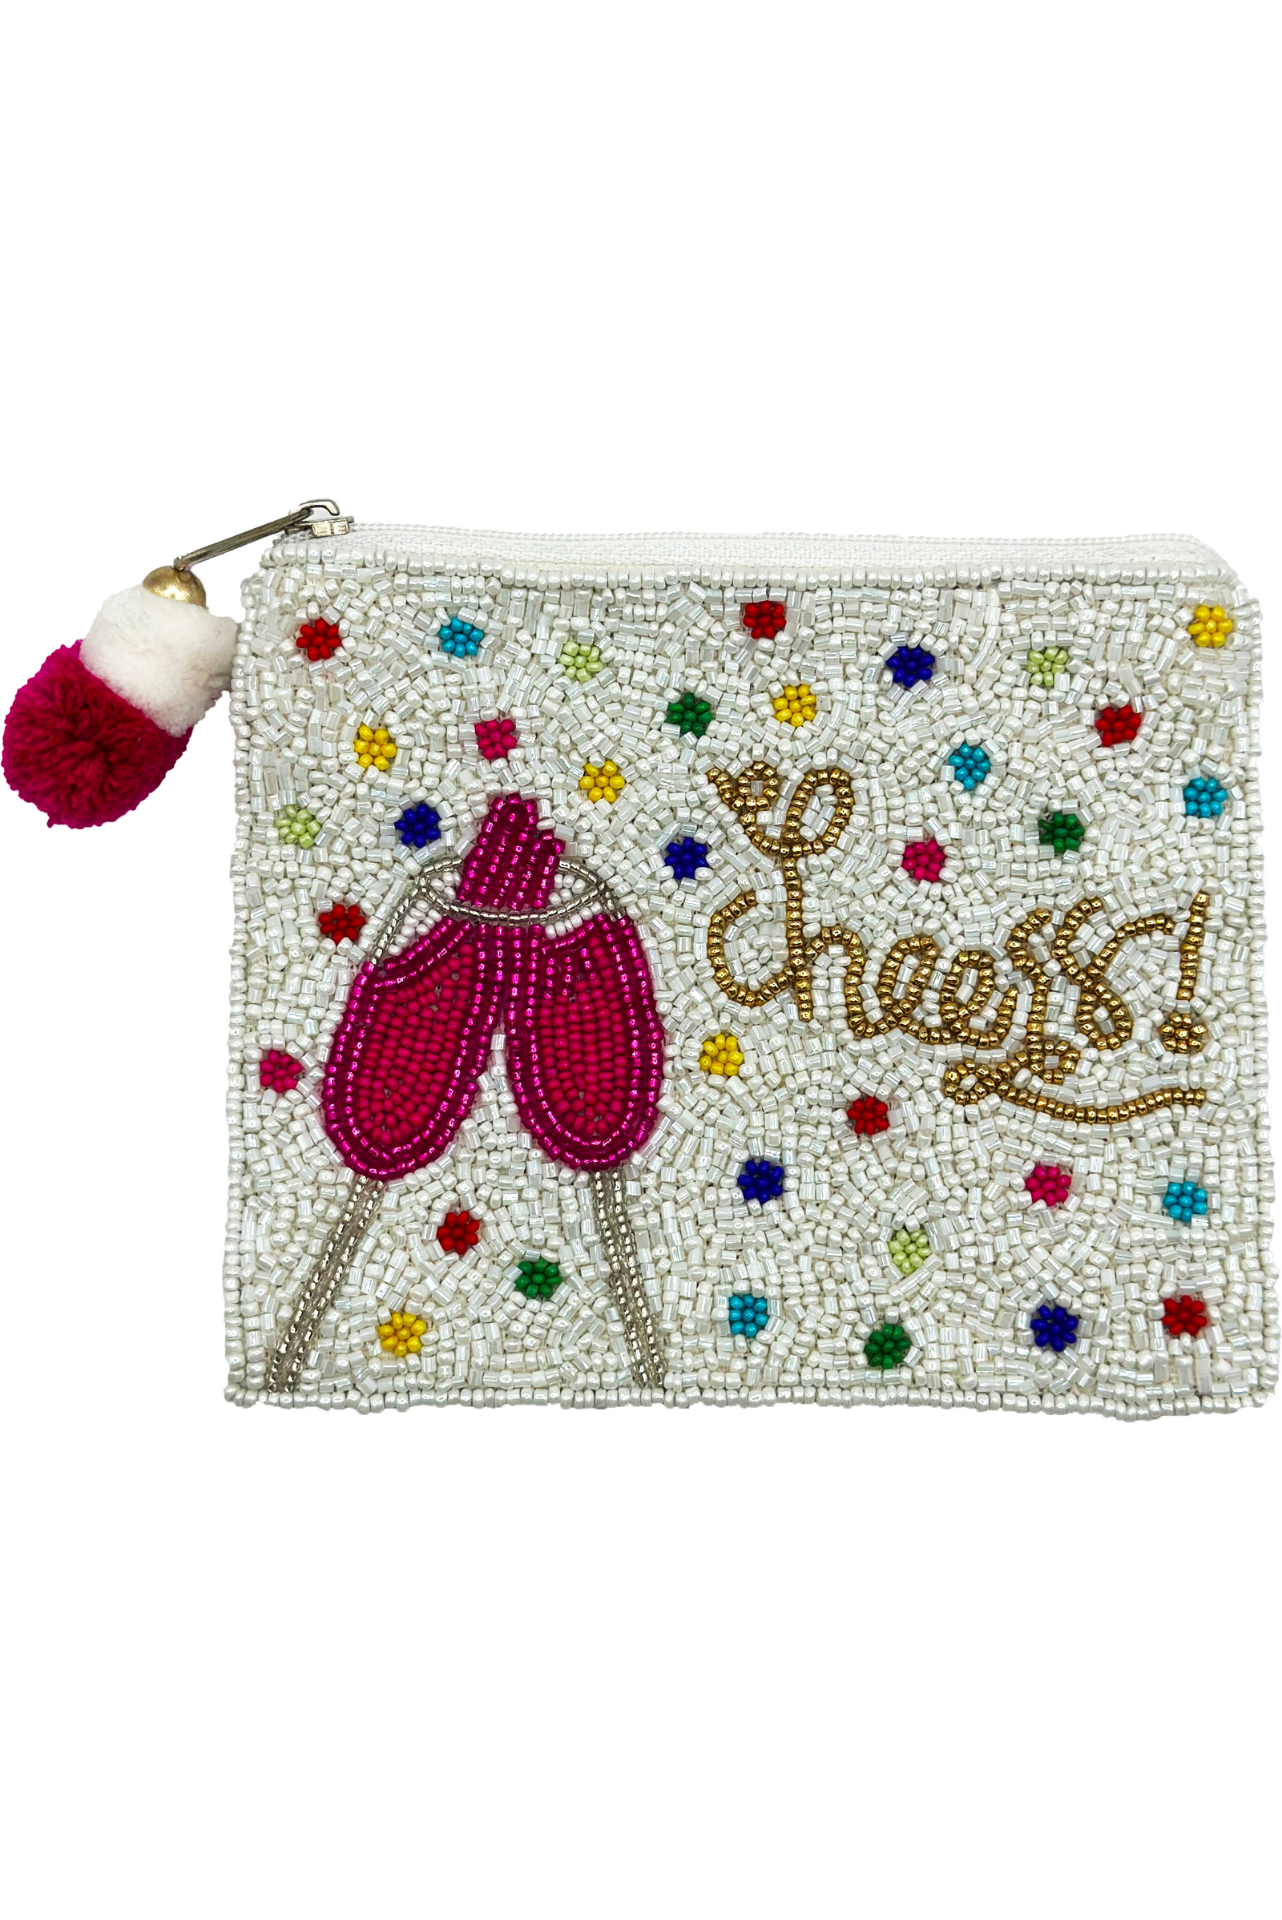 Cheers Beaded Pouch